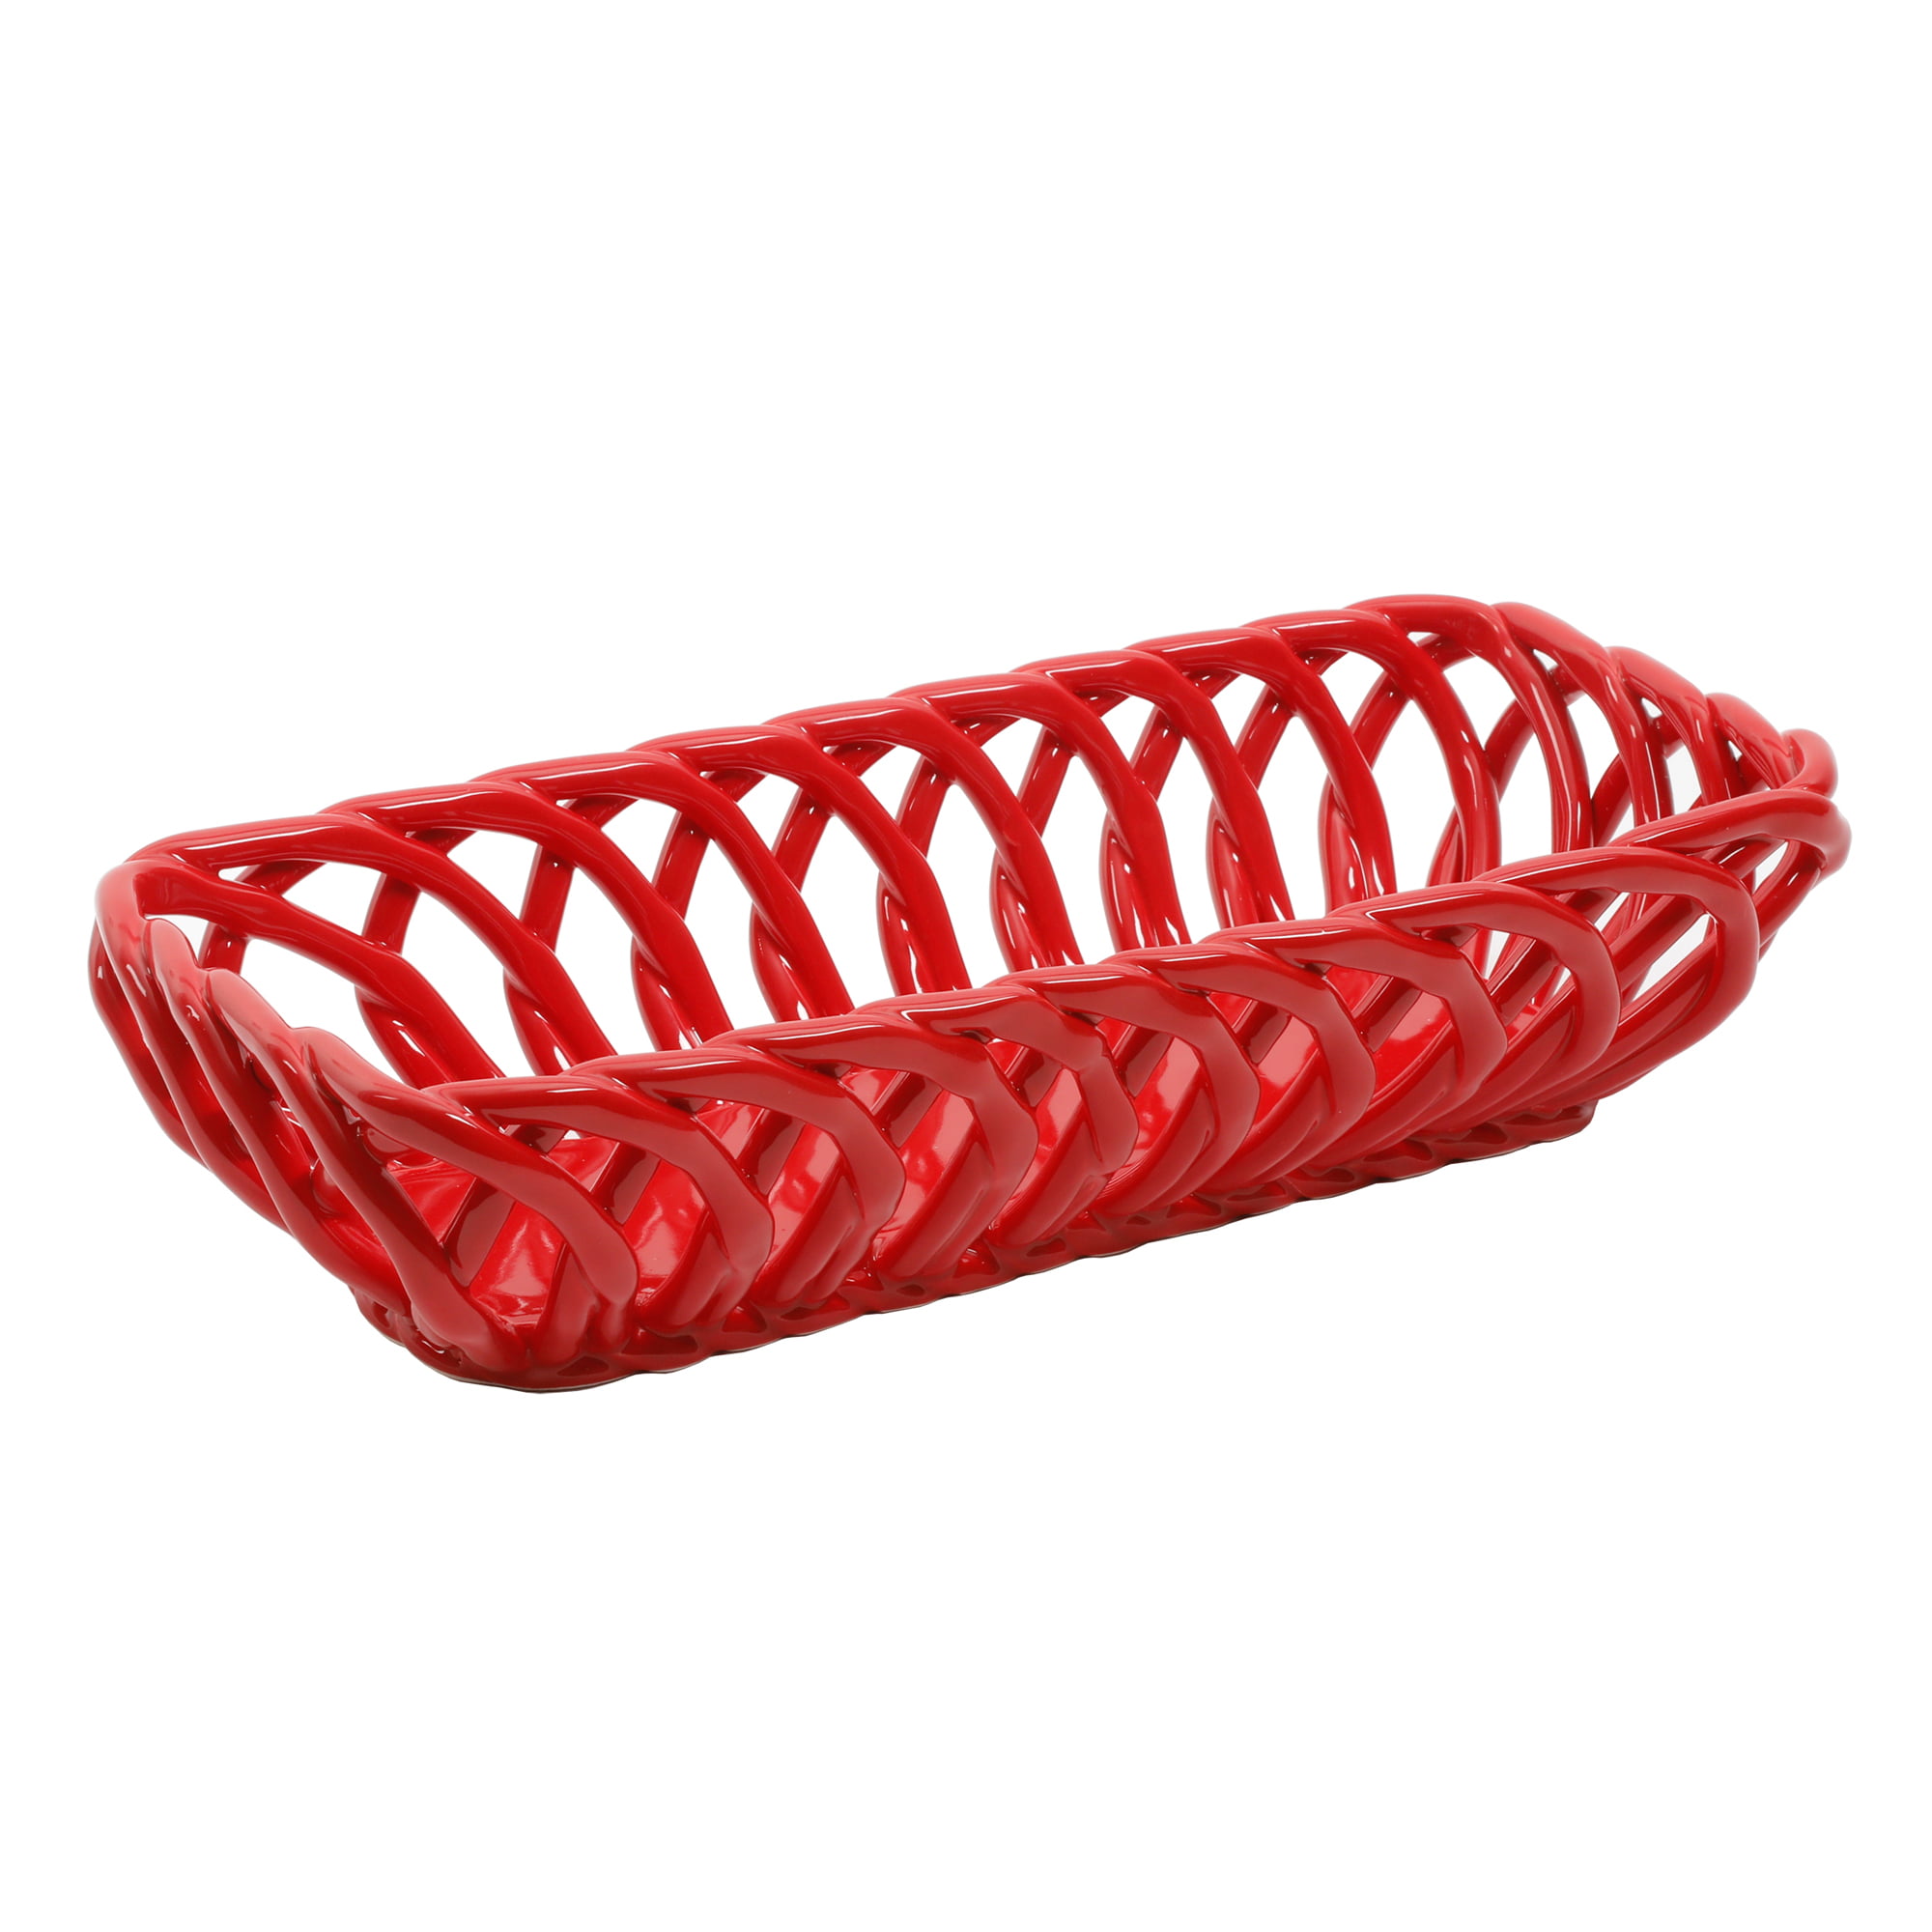 The Pioneer Woman Timeless Beauty 10.7-Inch Turquoise Bread Basket 